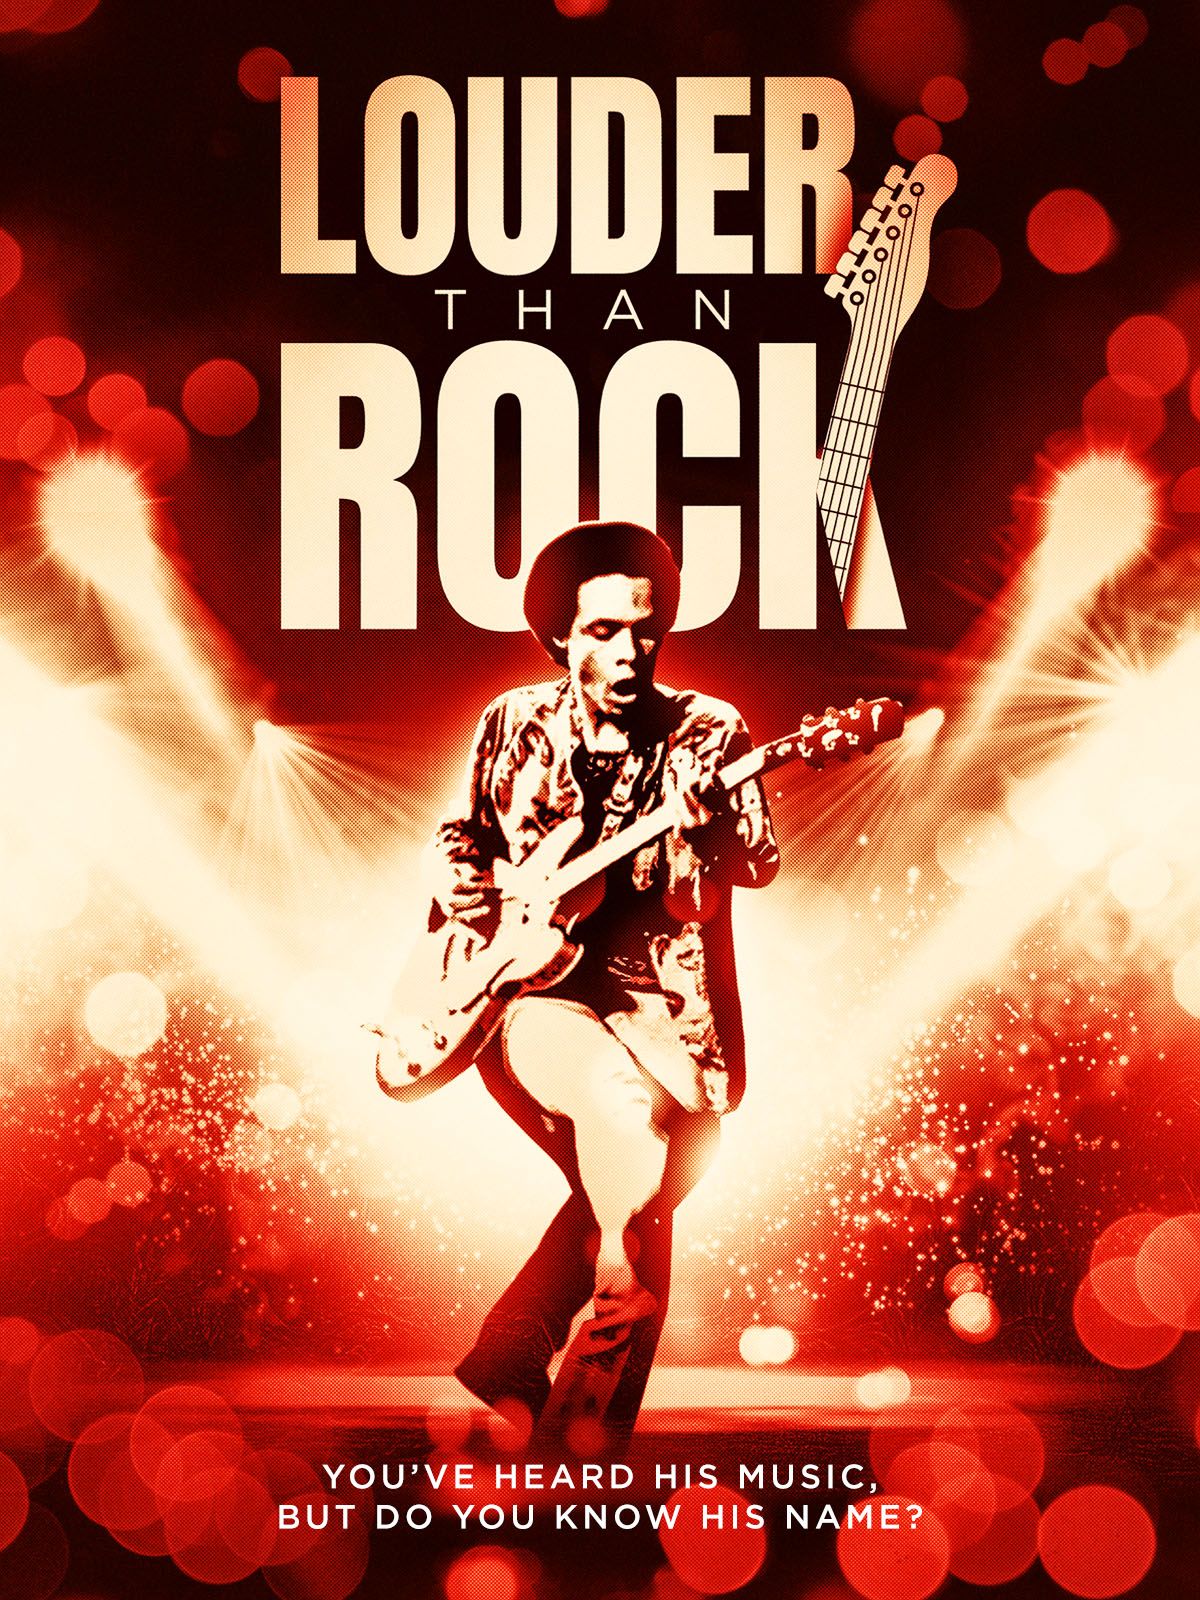 Keyart for the movie Louder Than Rock